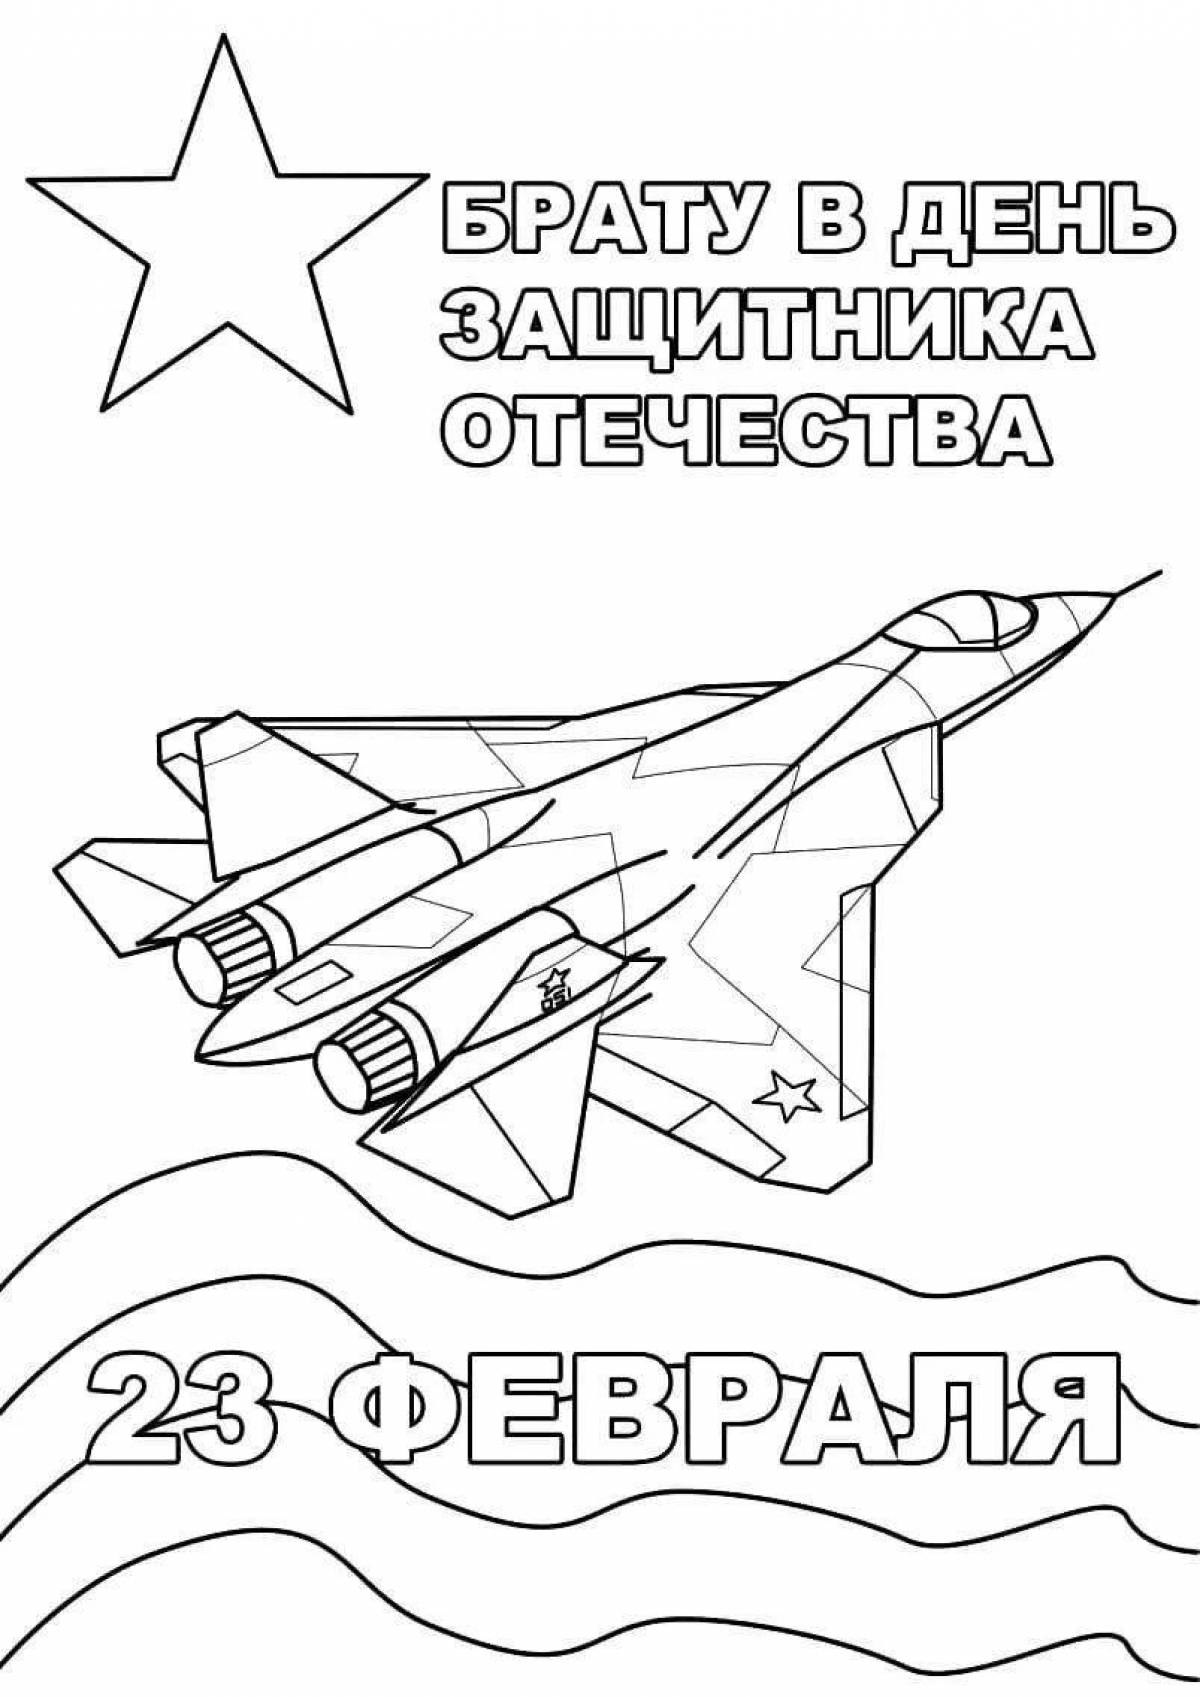 For preschoolers on Defender of the Fatherland Day #1